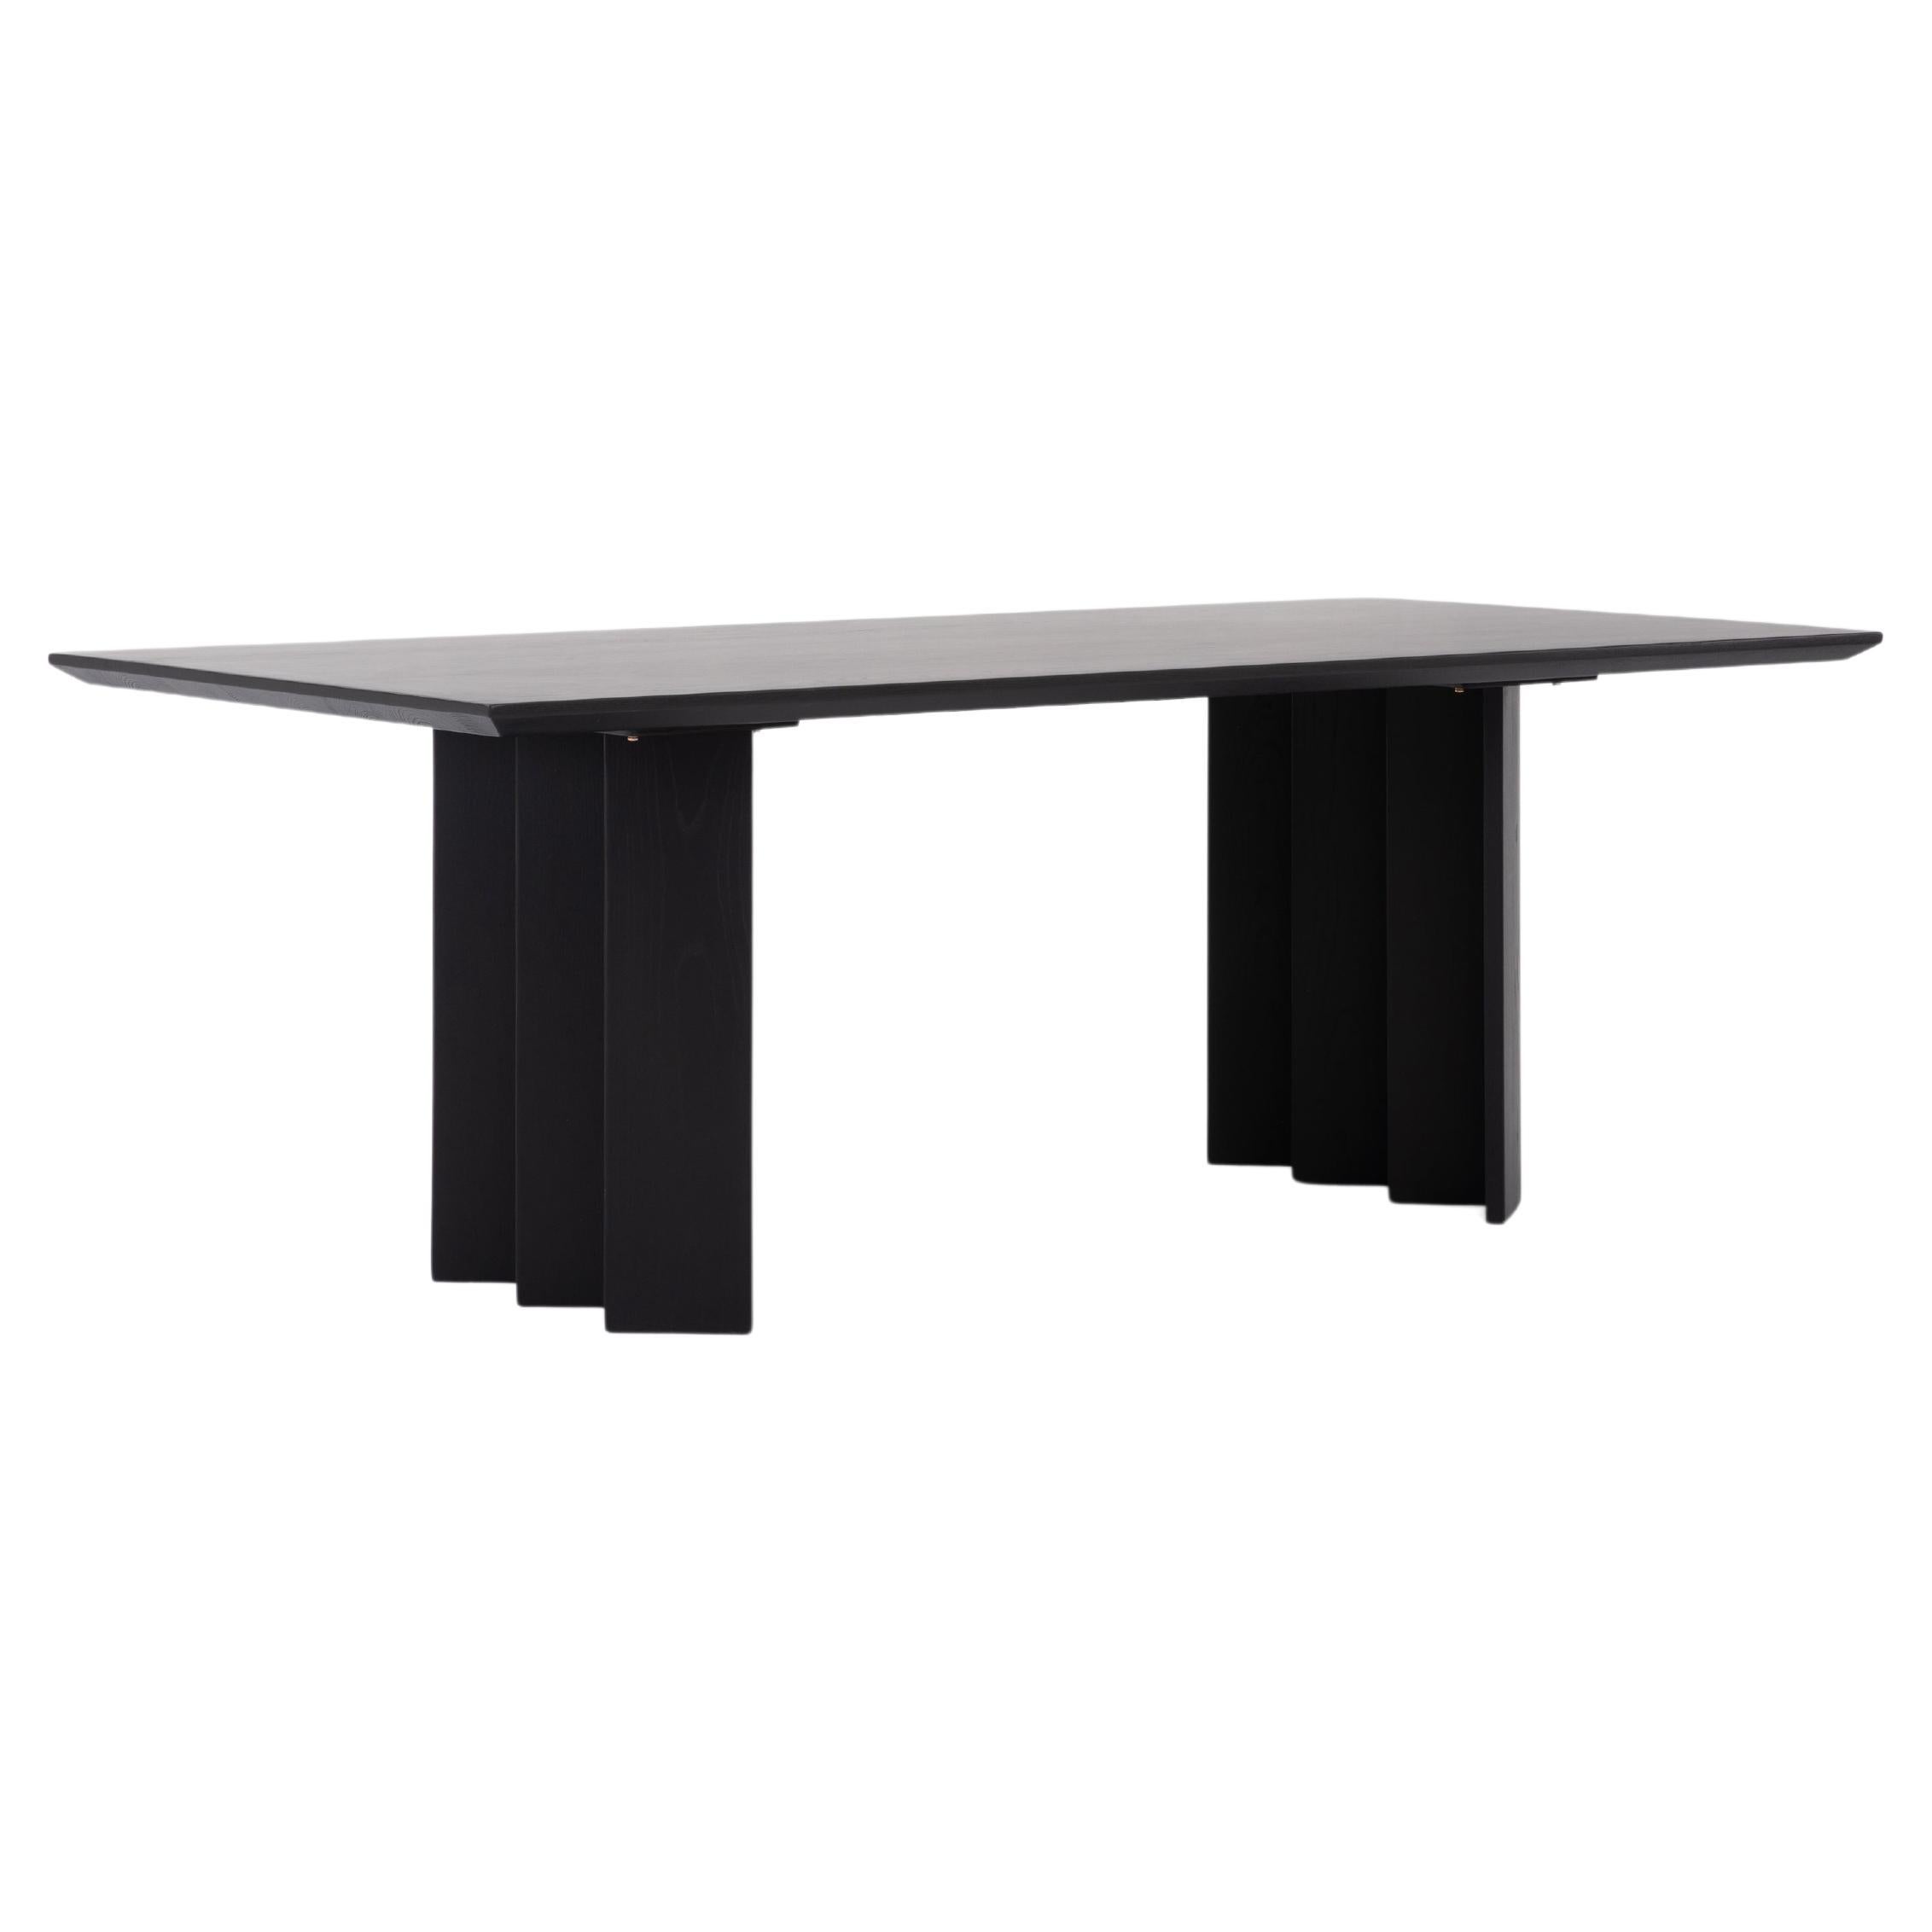 Zafal Dining Table 108", Black Minimalist Dining Table in Wood